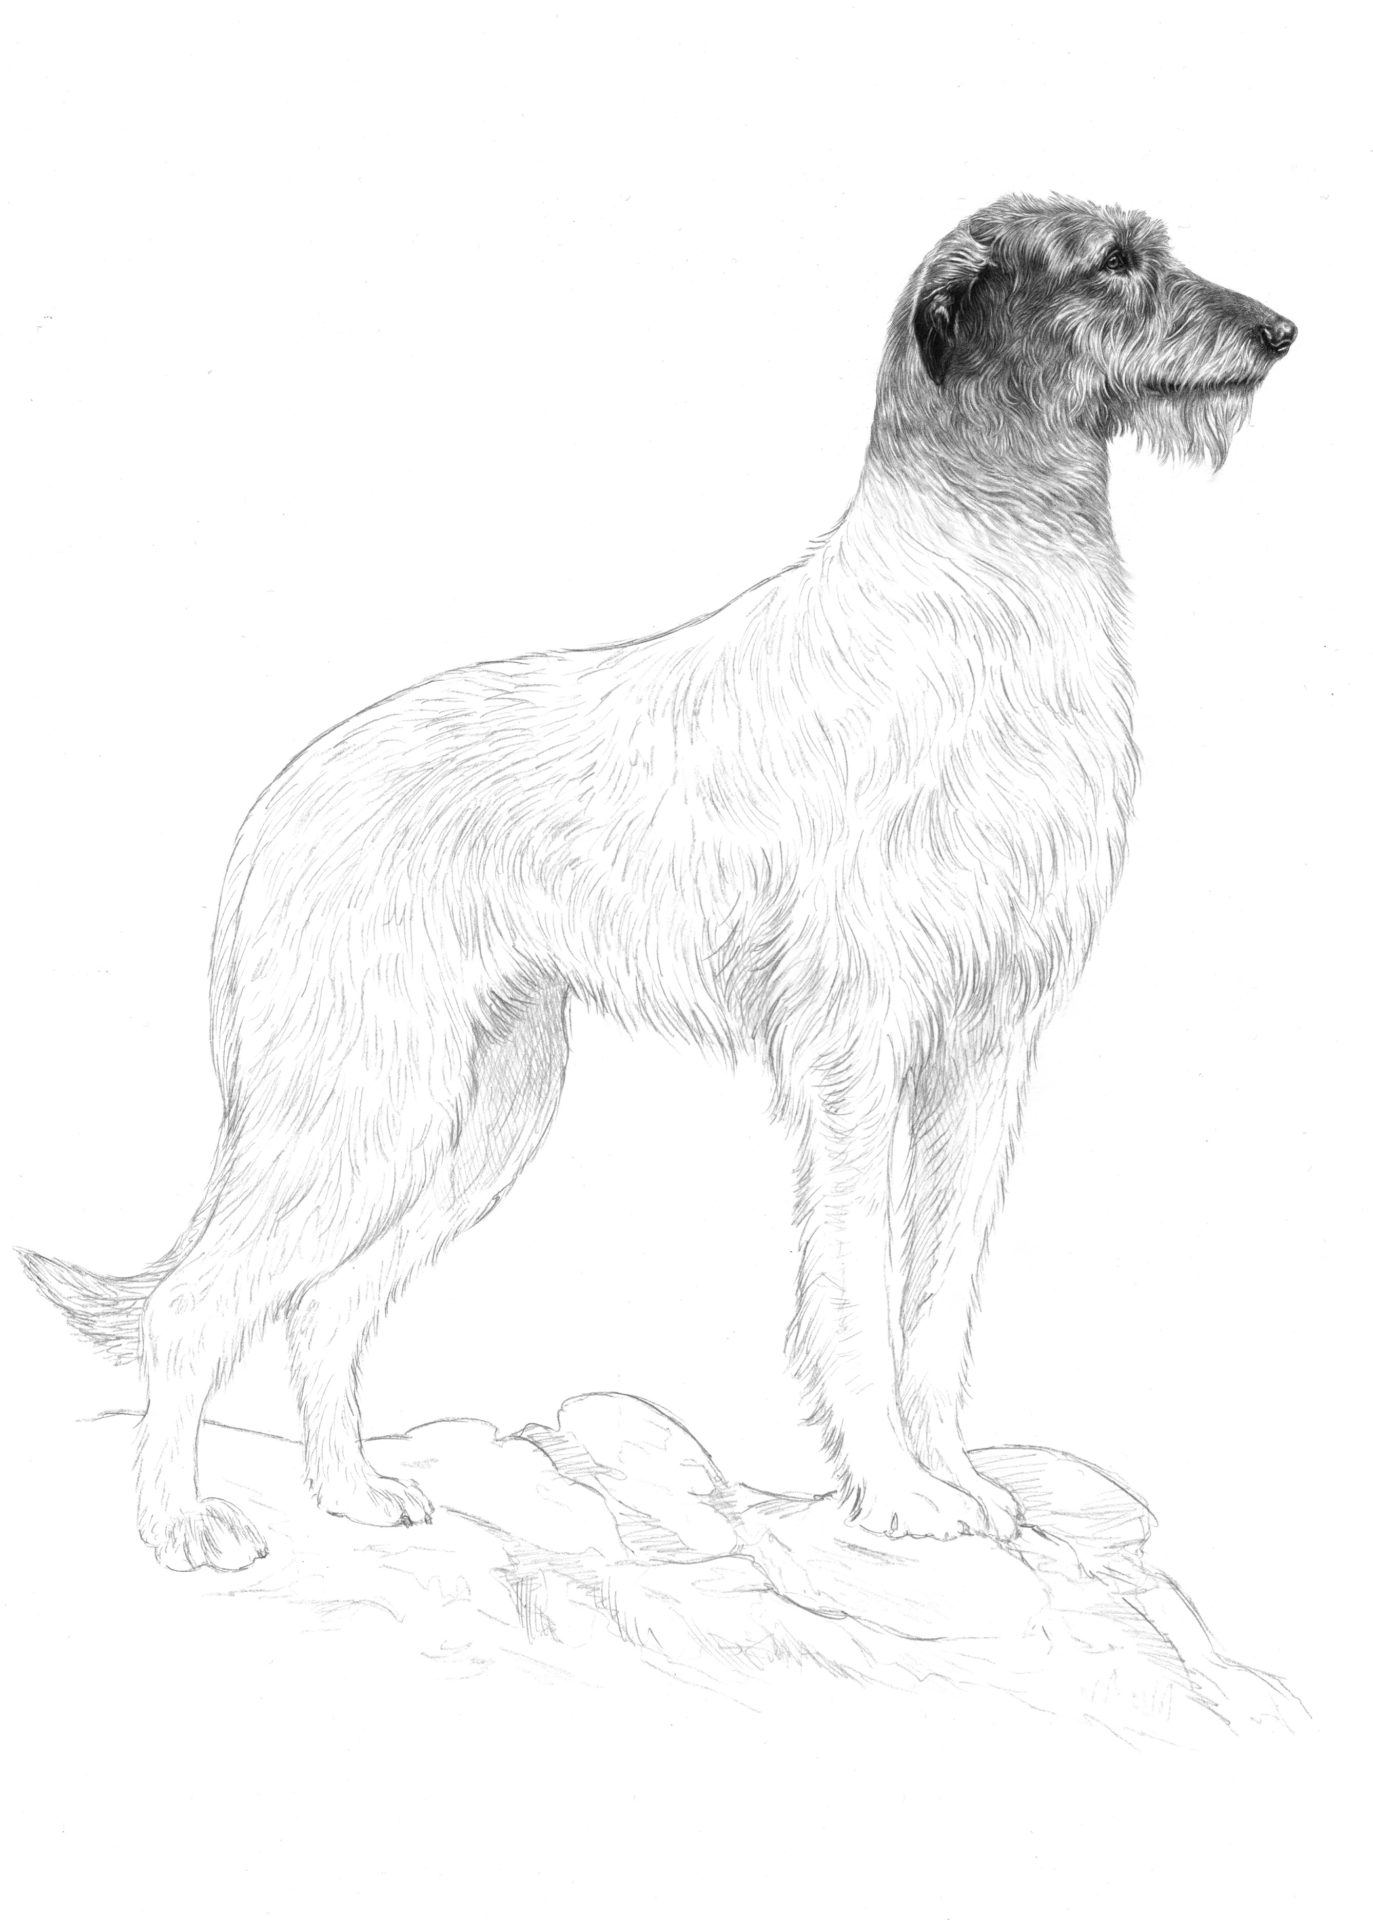 Early draft sketch of the Irish wolfhound for inclusion in the next passport.